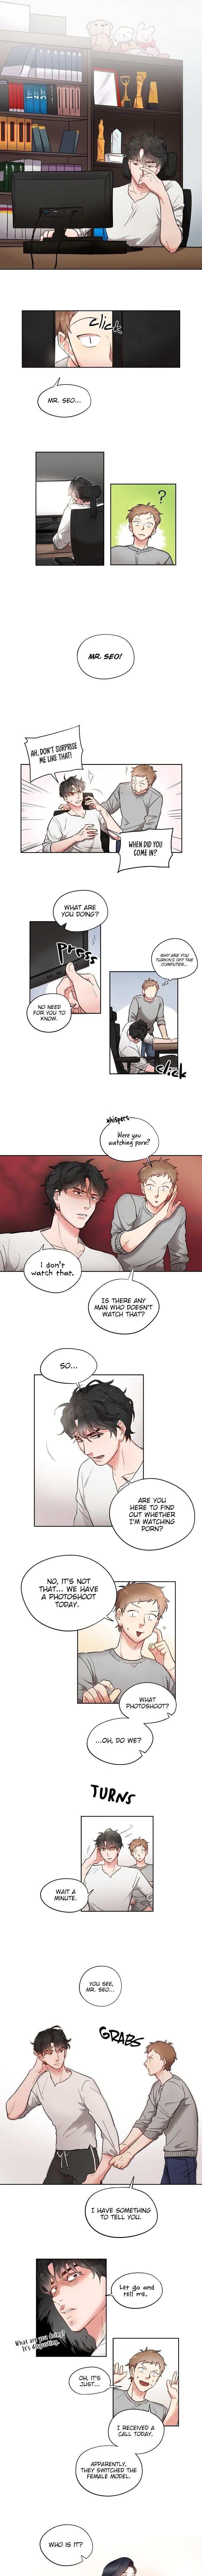 Liking you Excitedly Chapter 2 - Page 2